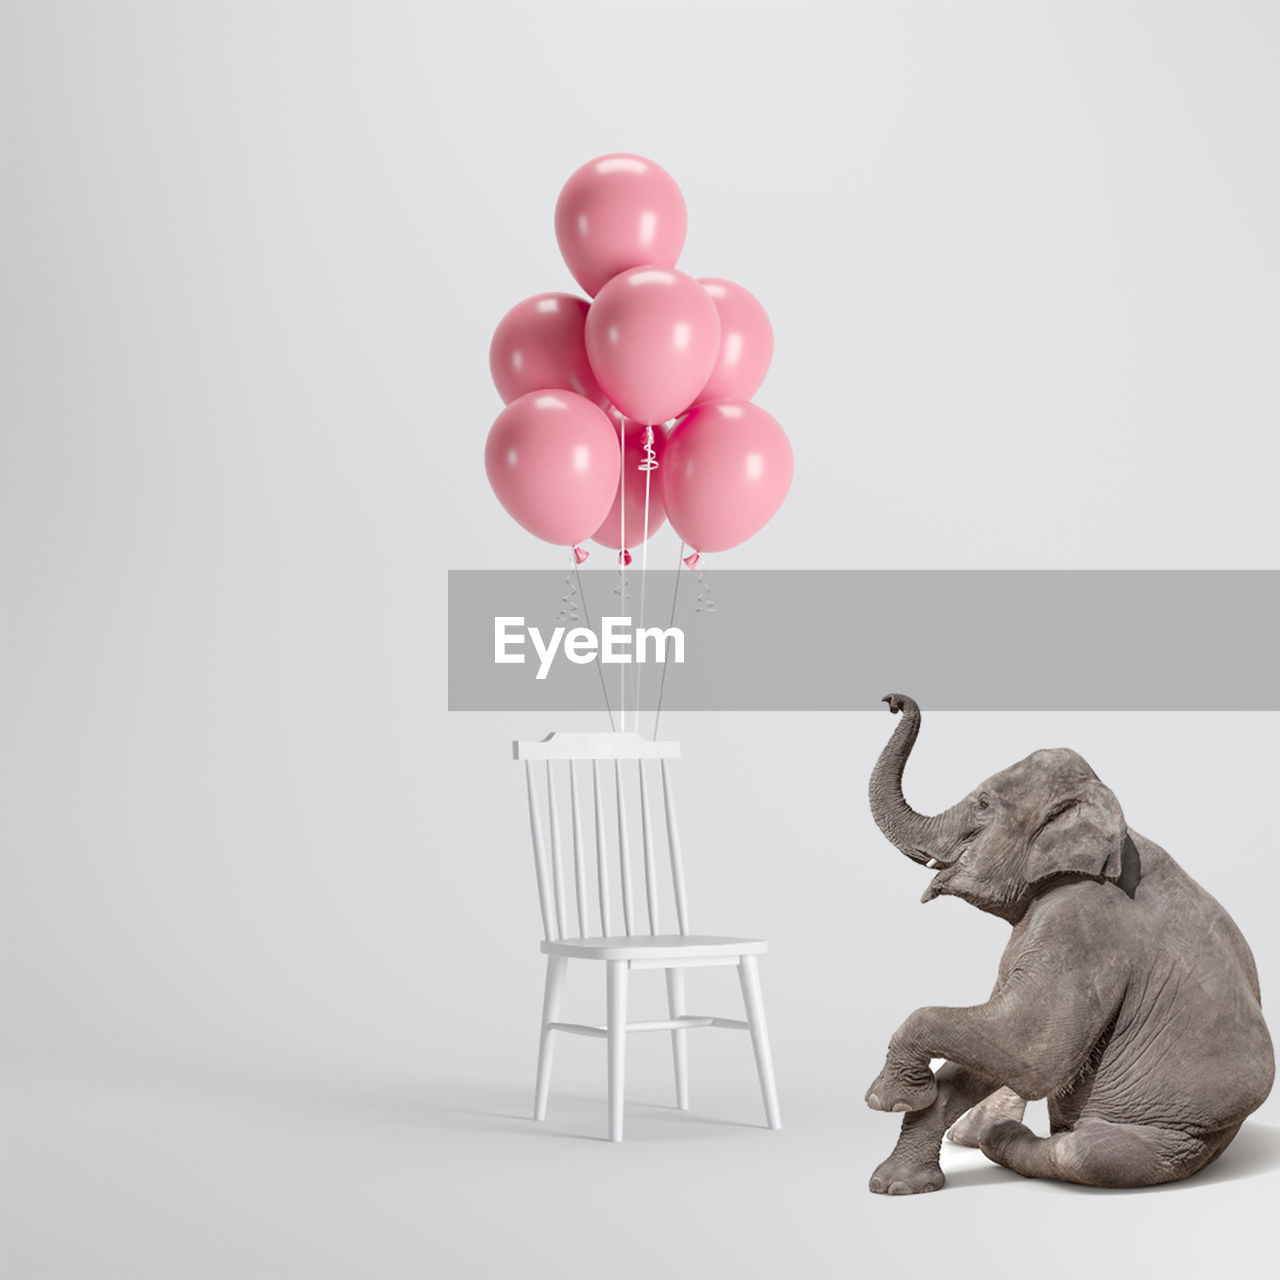 Digital composite image of elephant by balloons on chair against white background